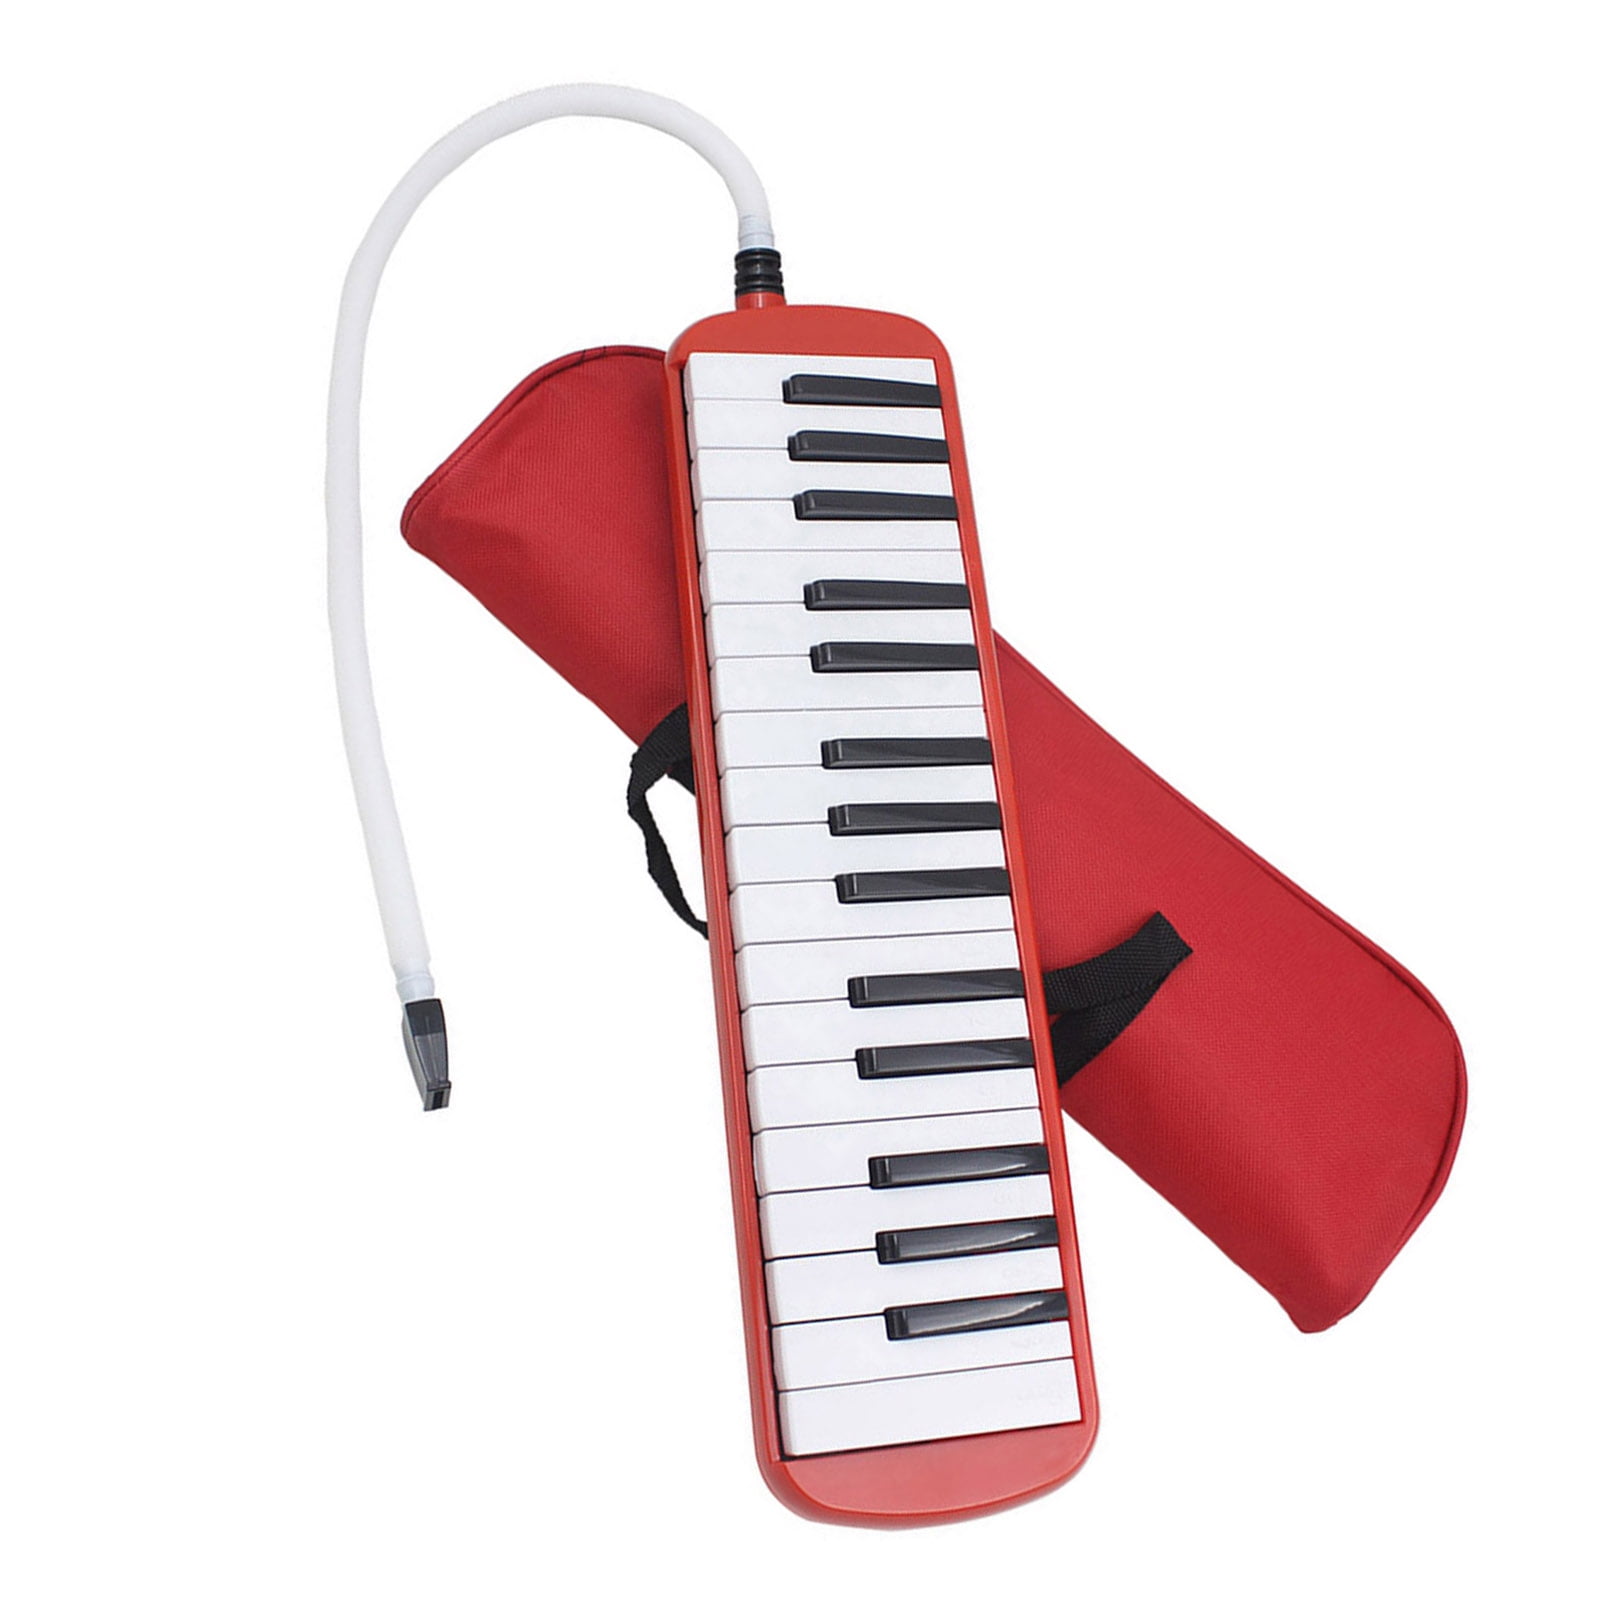 32 Piano Keys Melodica Musical Education Instrument for Beginner Kids  Children Gift with Carrying Bag Red 